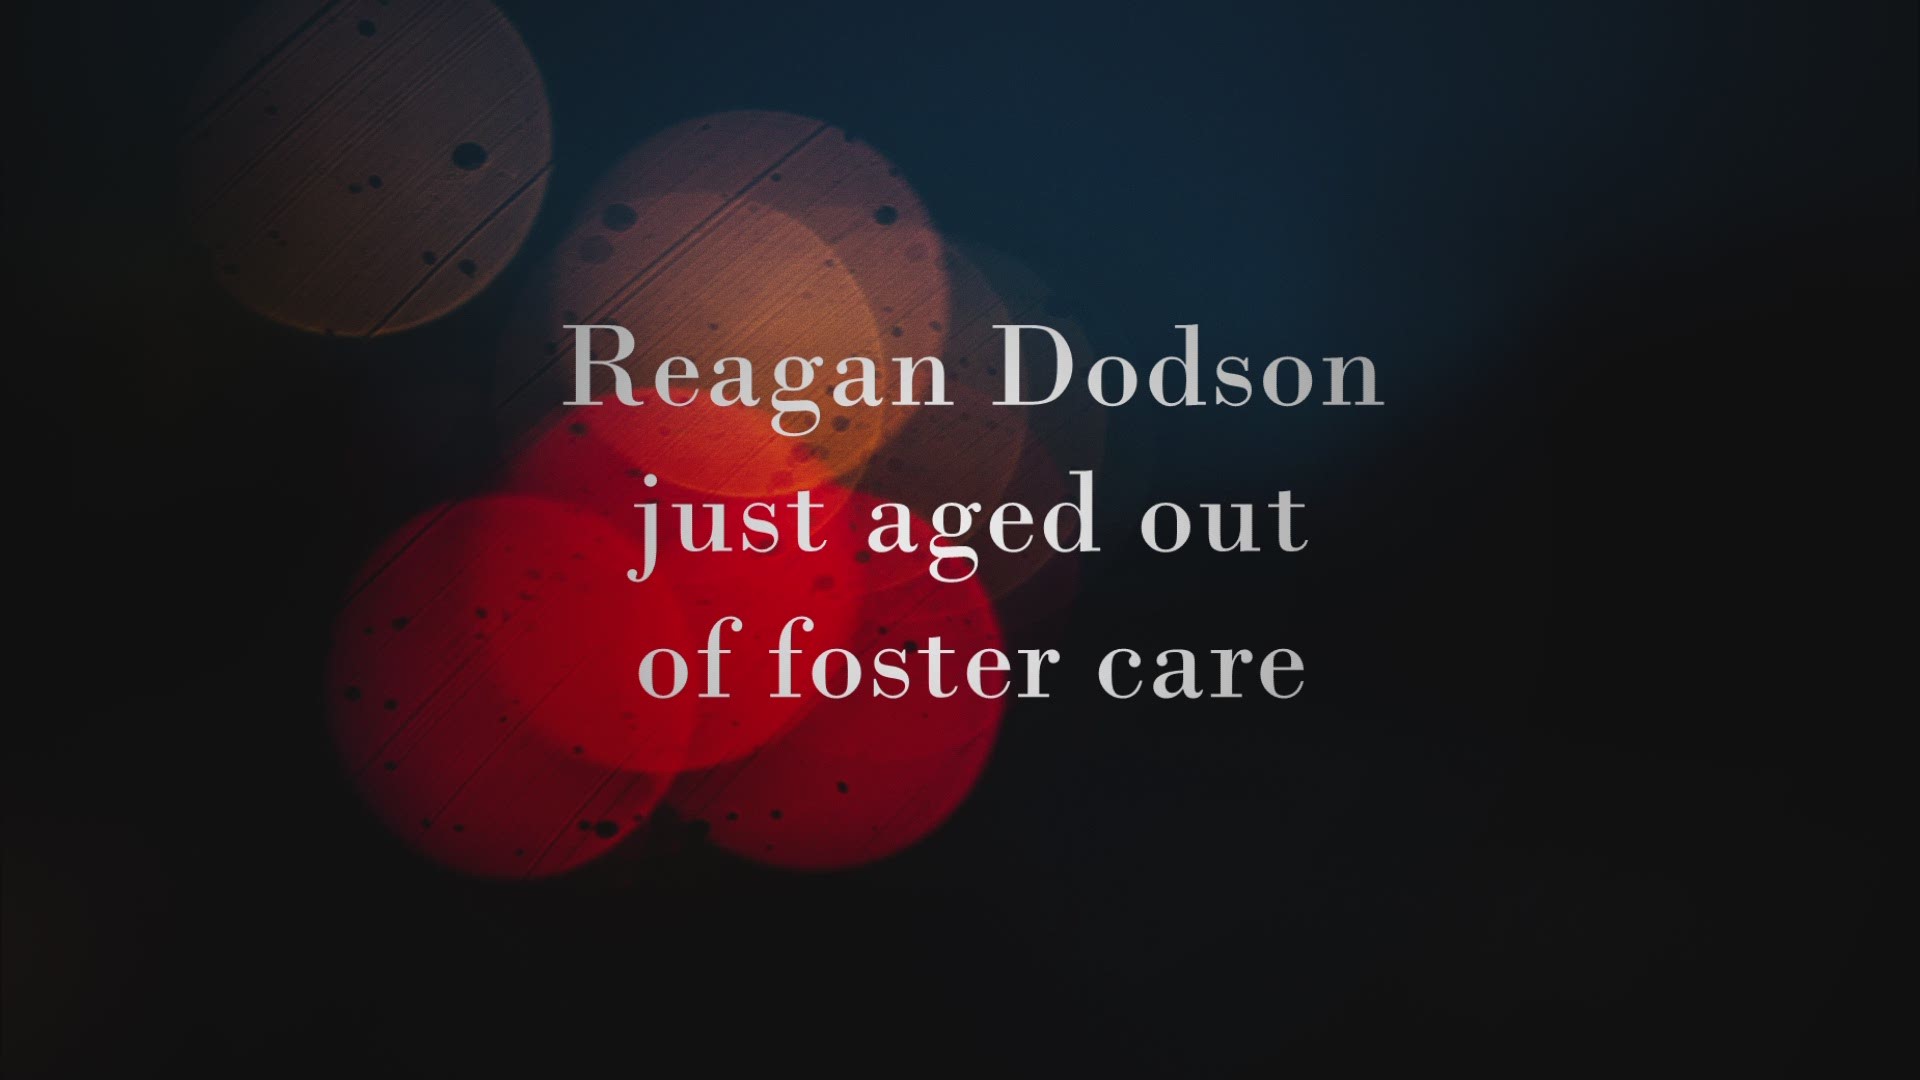 Reagan Dodson was 16 years old when she was placed into foster care. She wants you to know you are not alone.